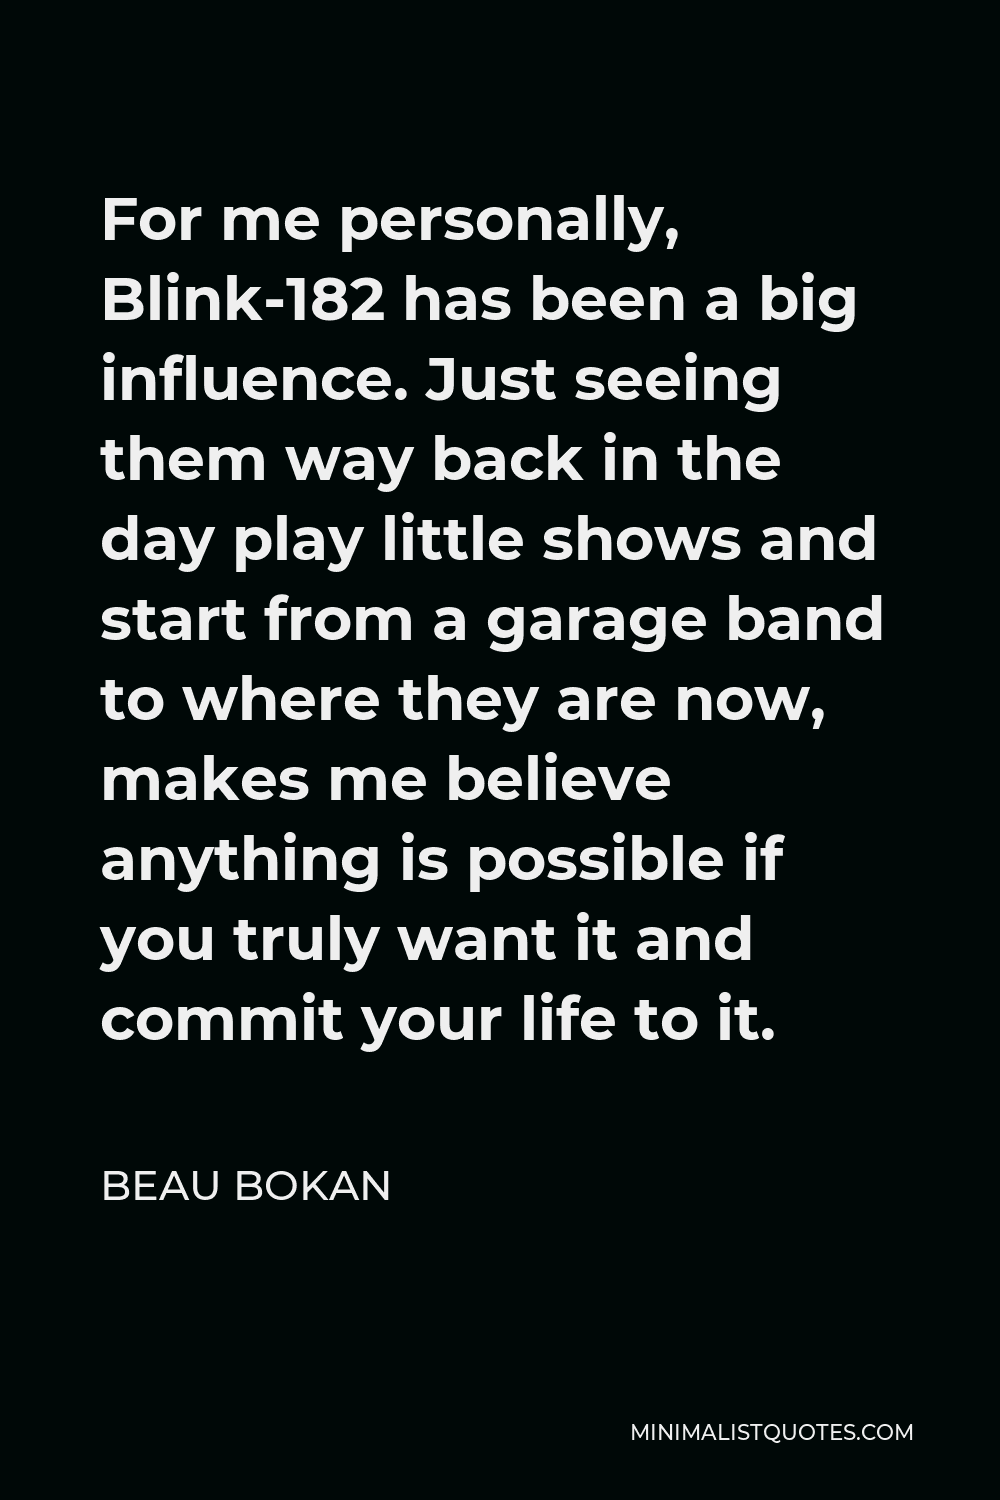 Beau Bokan Quote - For me personally, Blink-182 has been a big influence. Just seeing them way back in the day play little shows and start from a garage band to where they are now, makes me believe anything is possible if you truly want it and commit your life to it.